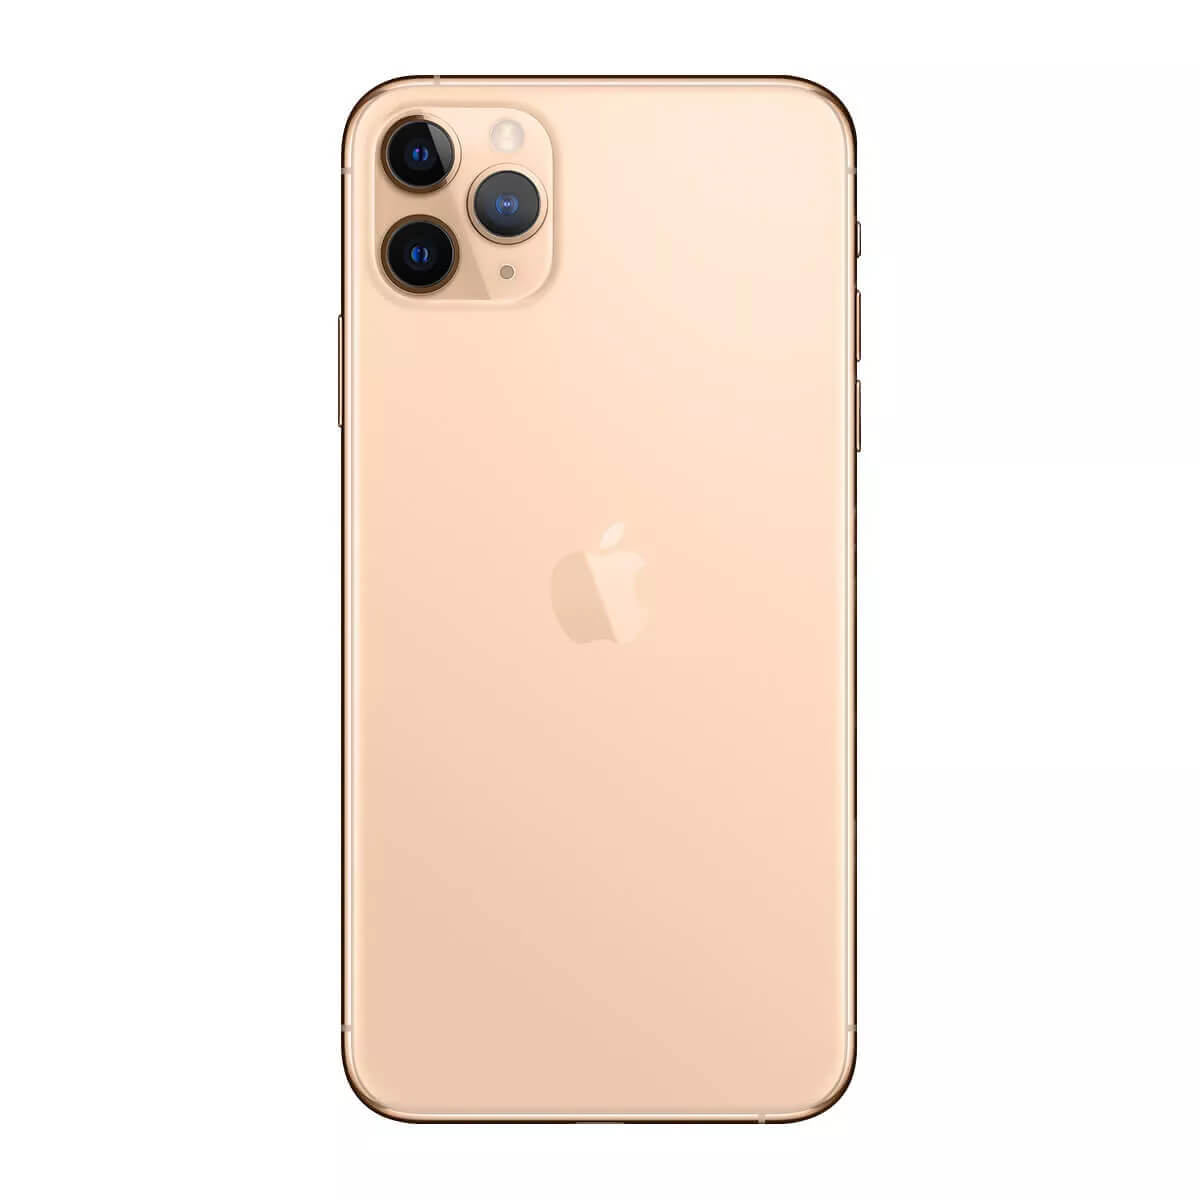 Non Active Apple iPhone 11 Pro Max 64GB - Gold